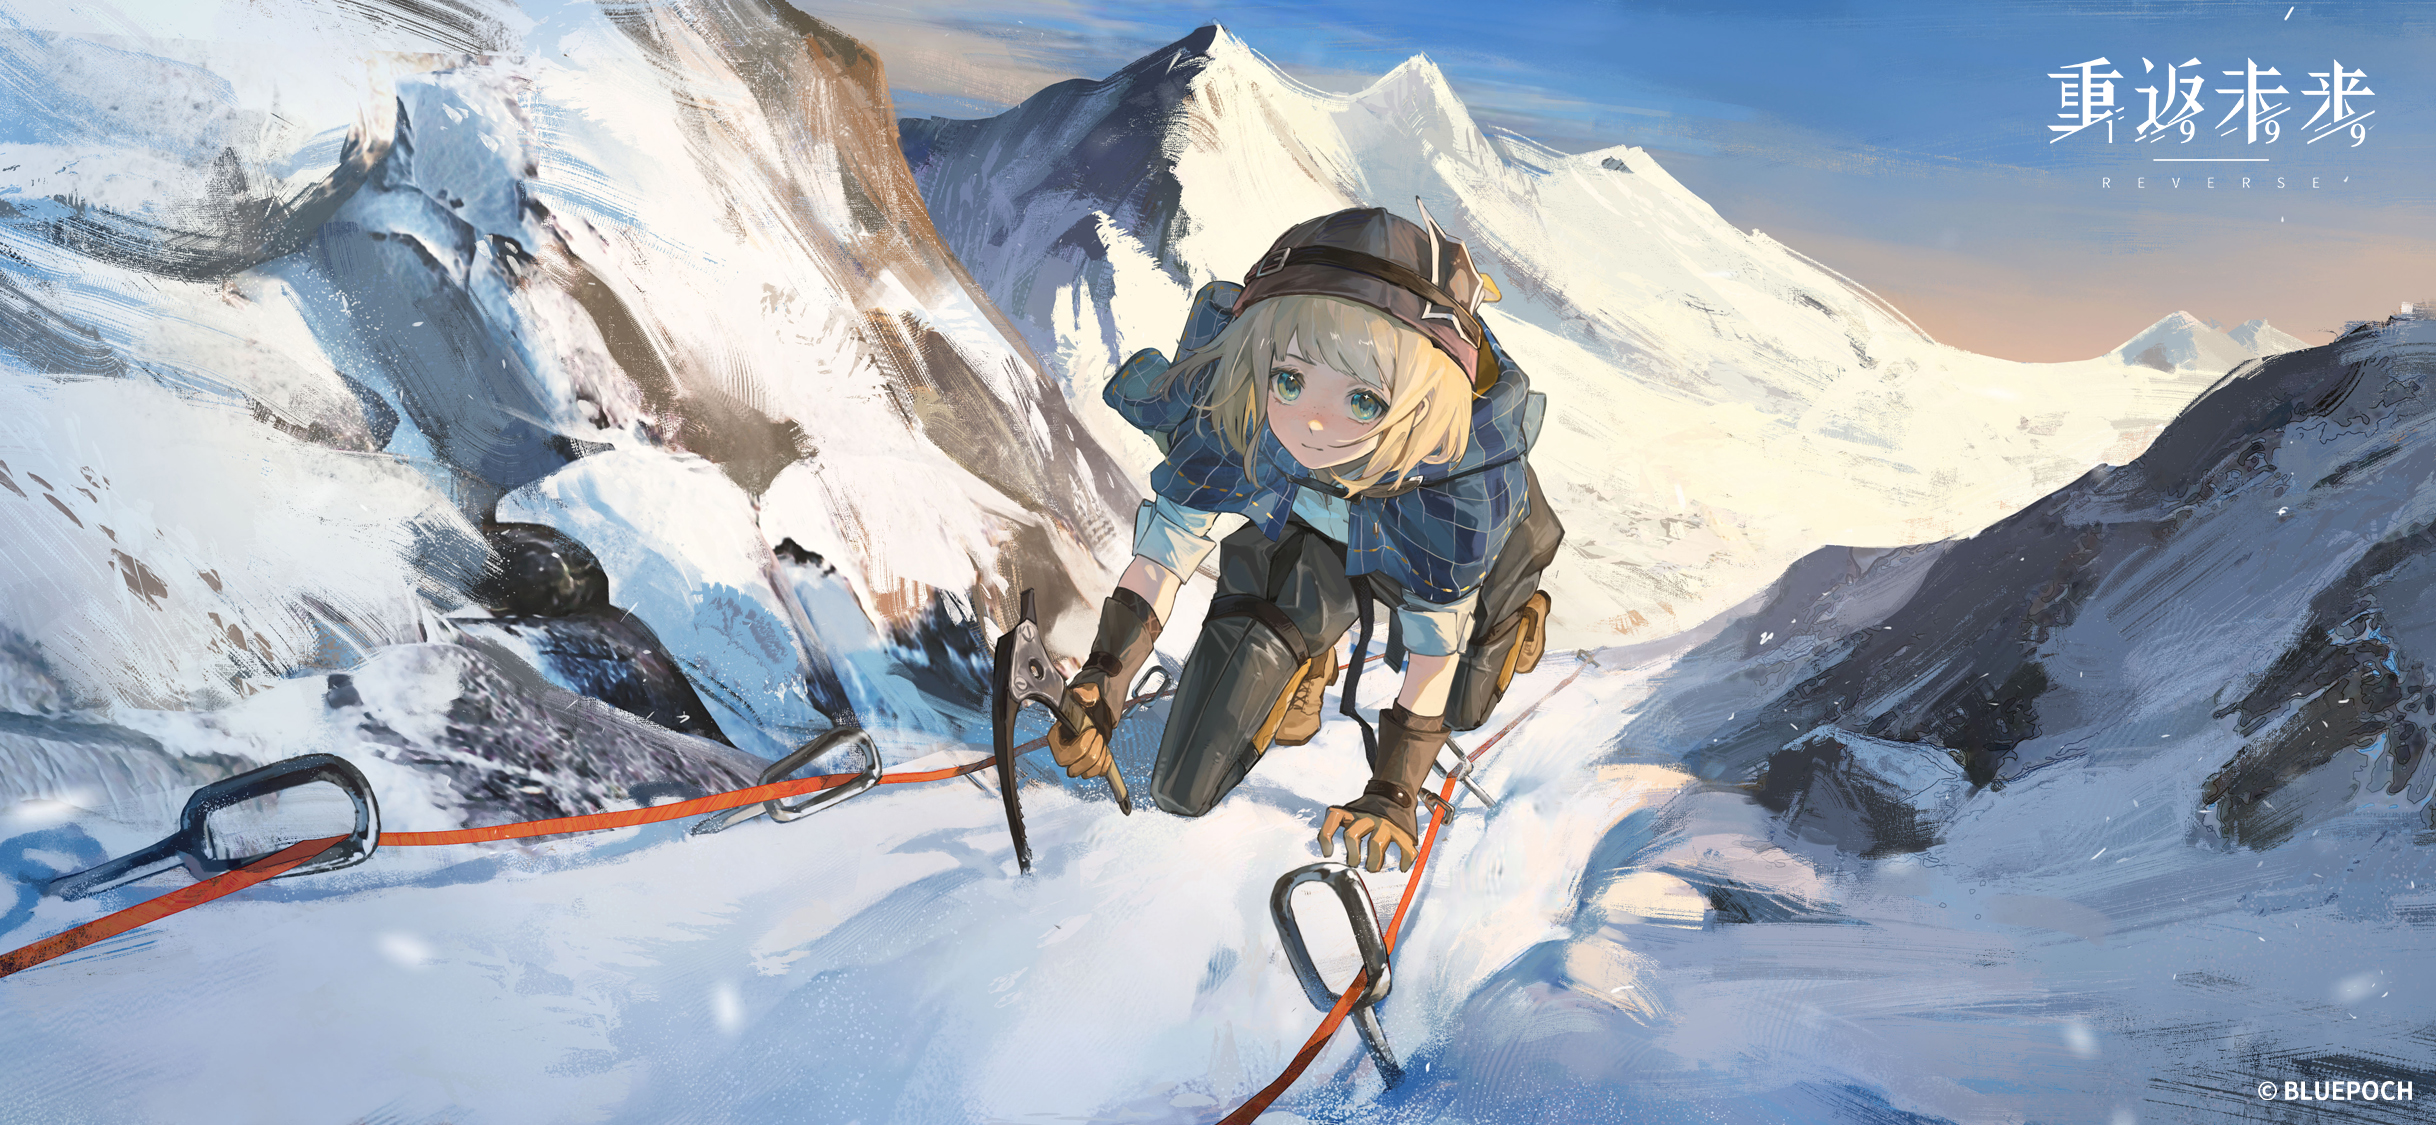 Lexica - man on top of a snowy mountain illustration old anime style